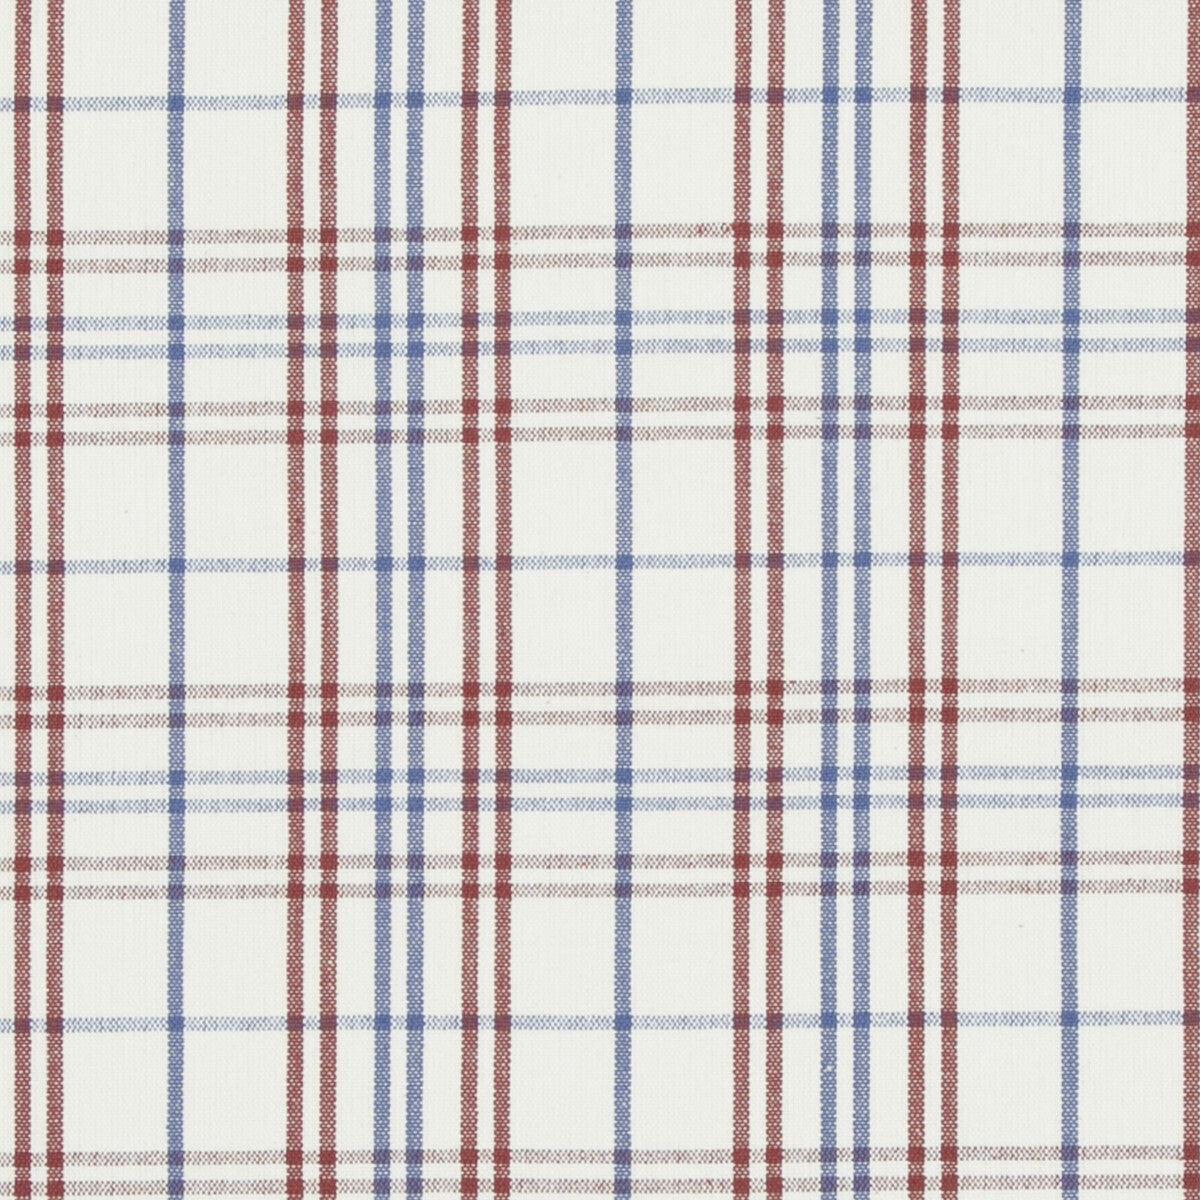 Purbeck Check fabric in red/blue color - pattern PF50508.4.0 - by Baker Lifestyle in the Bridport collection